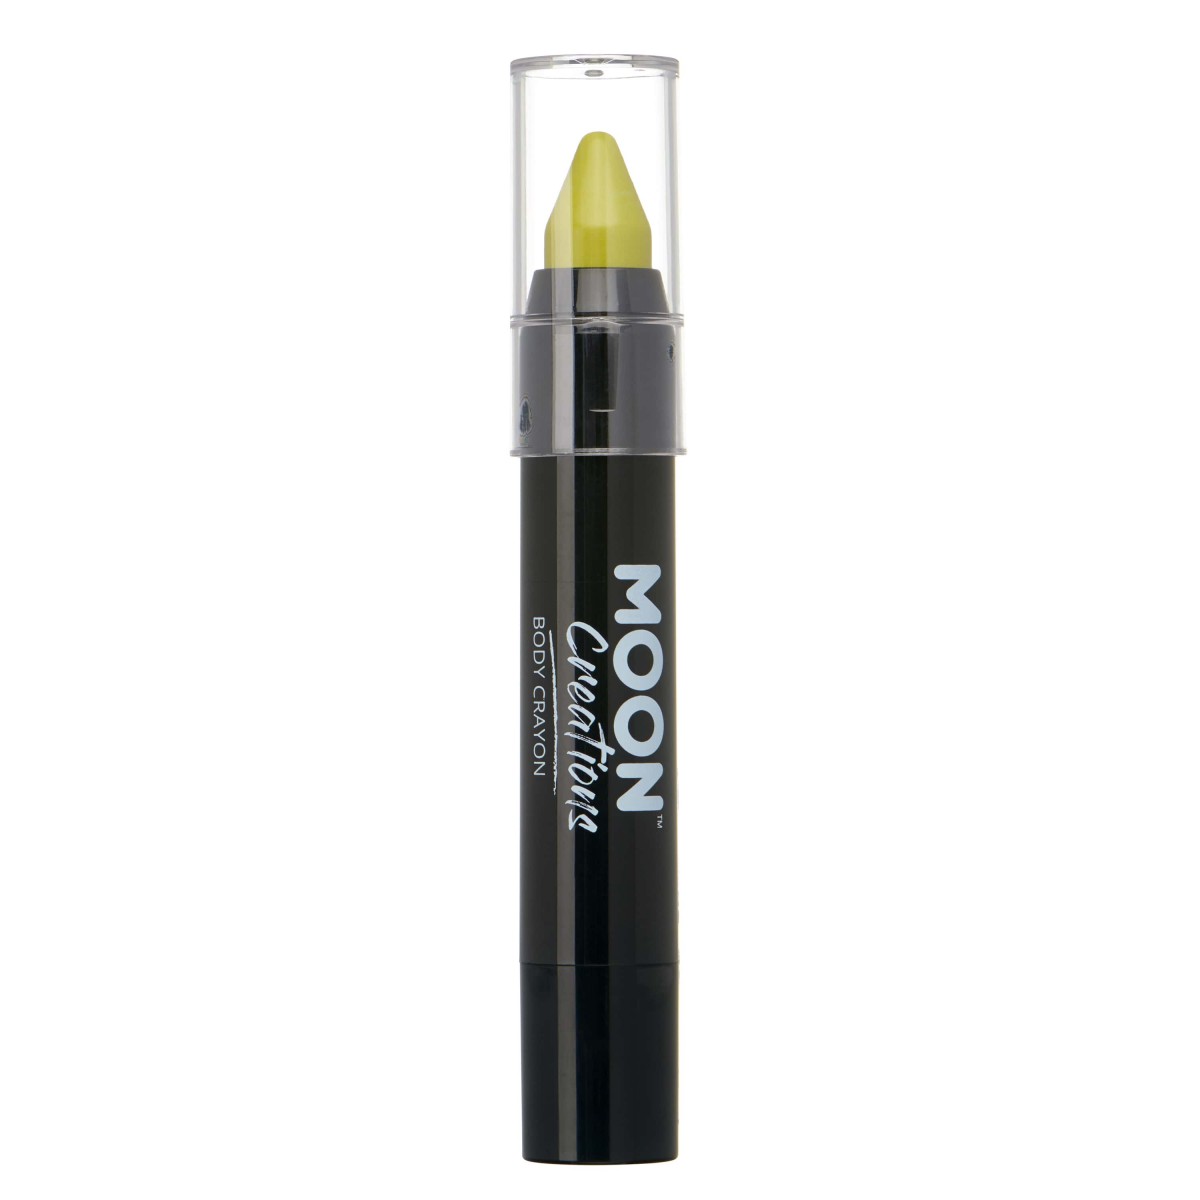 MOON CREATIONS C3 FACE & BODY CRAYON LIME GREEN 3.2g